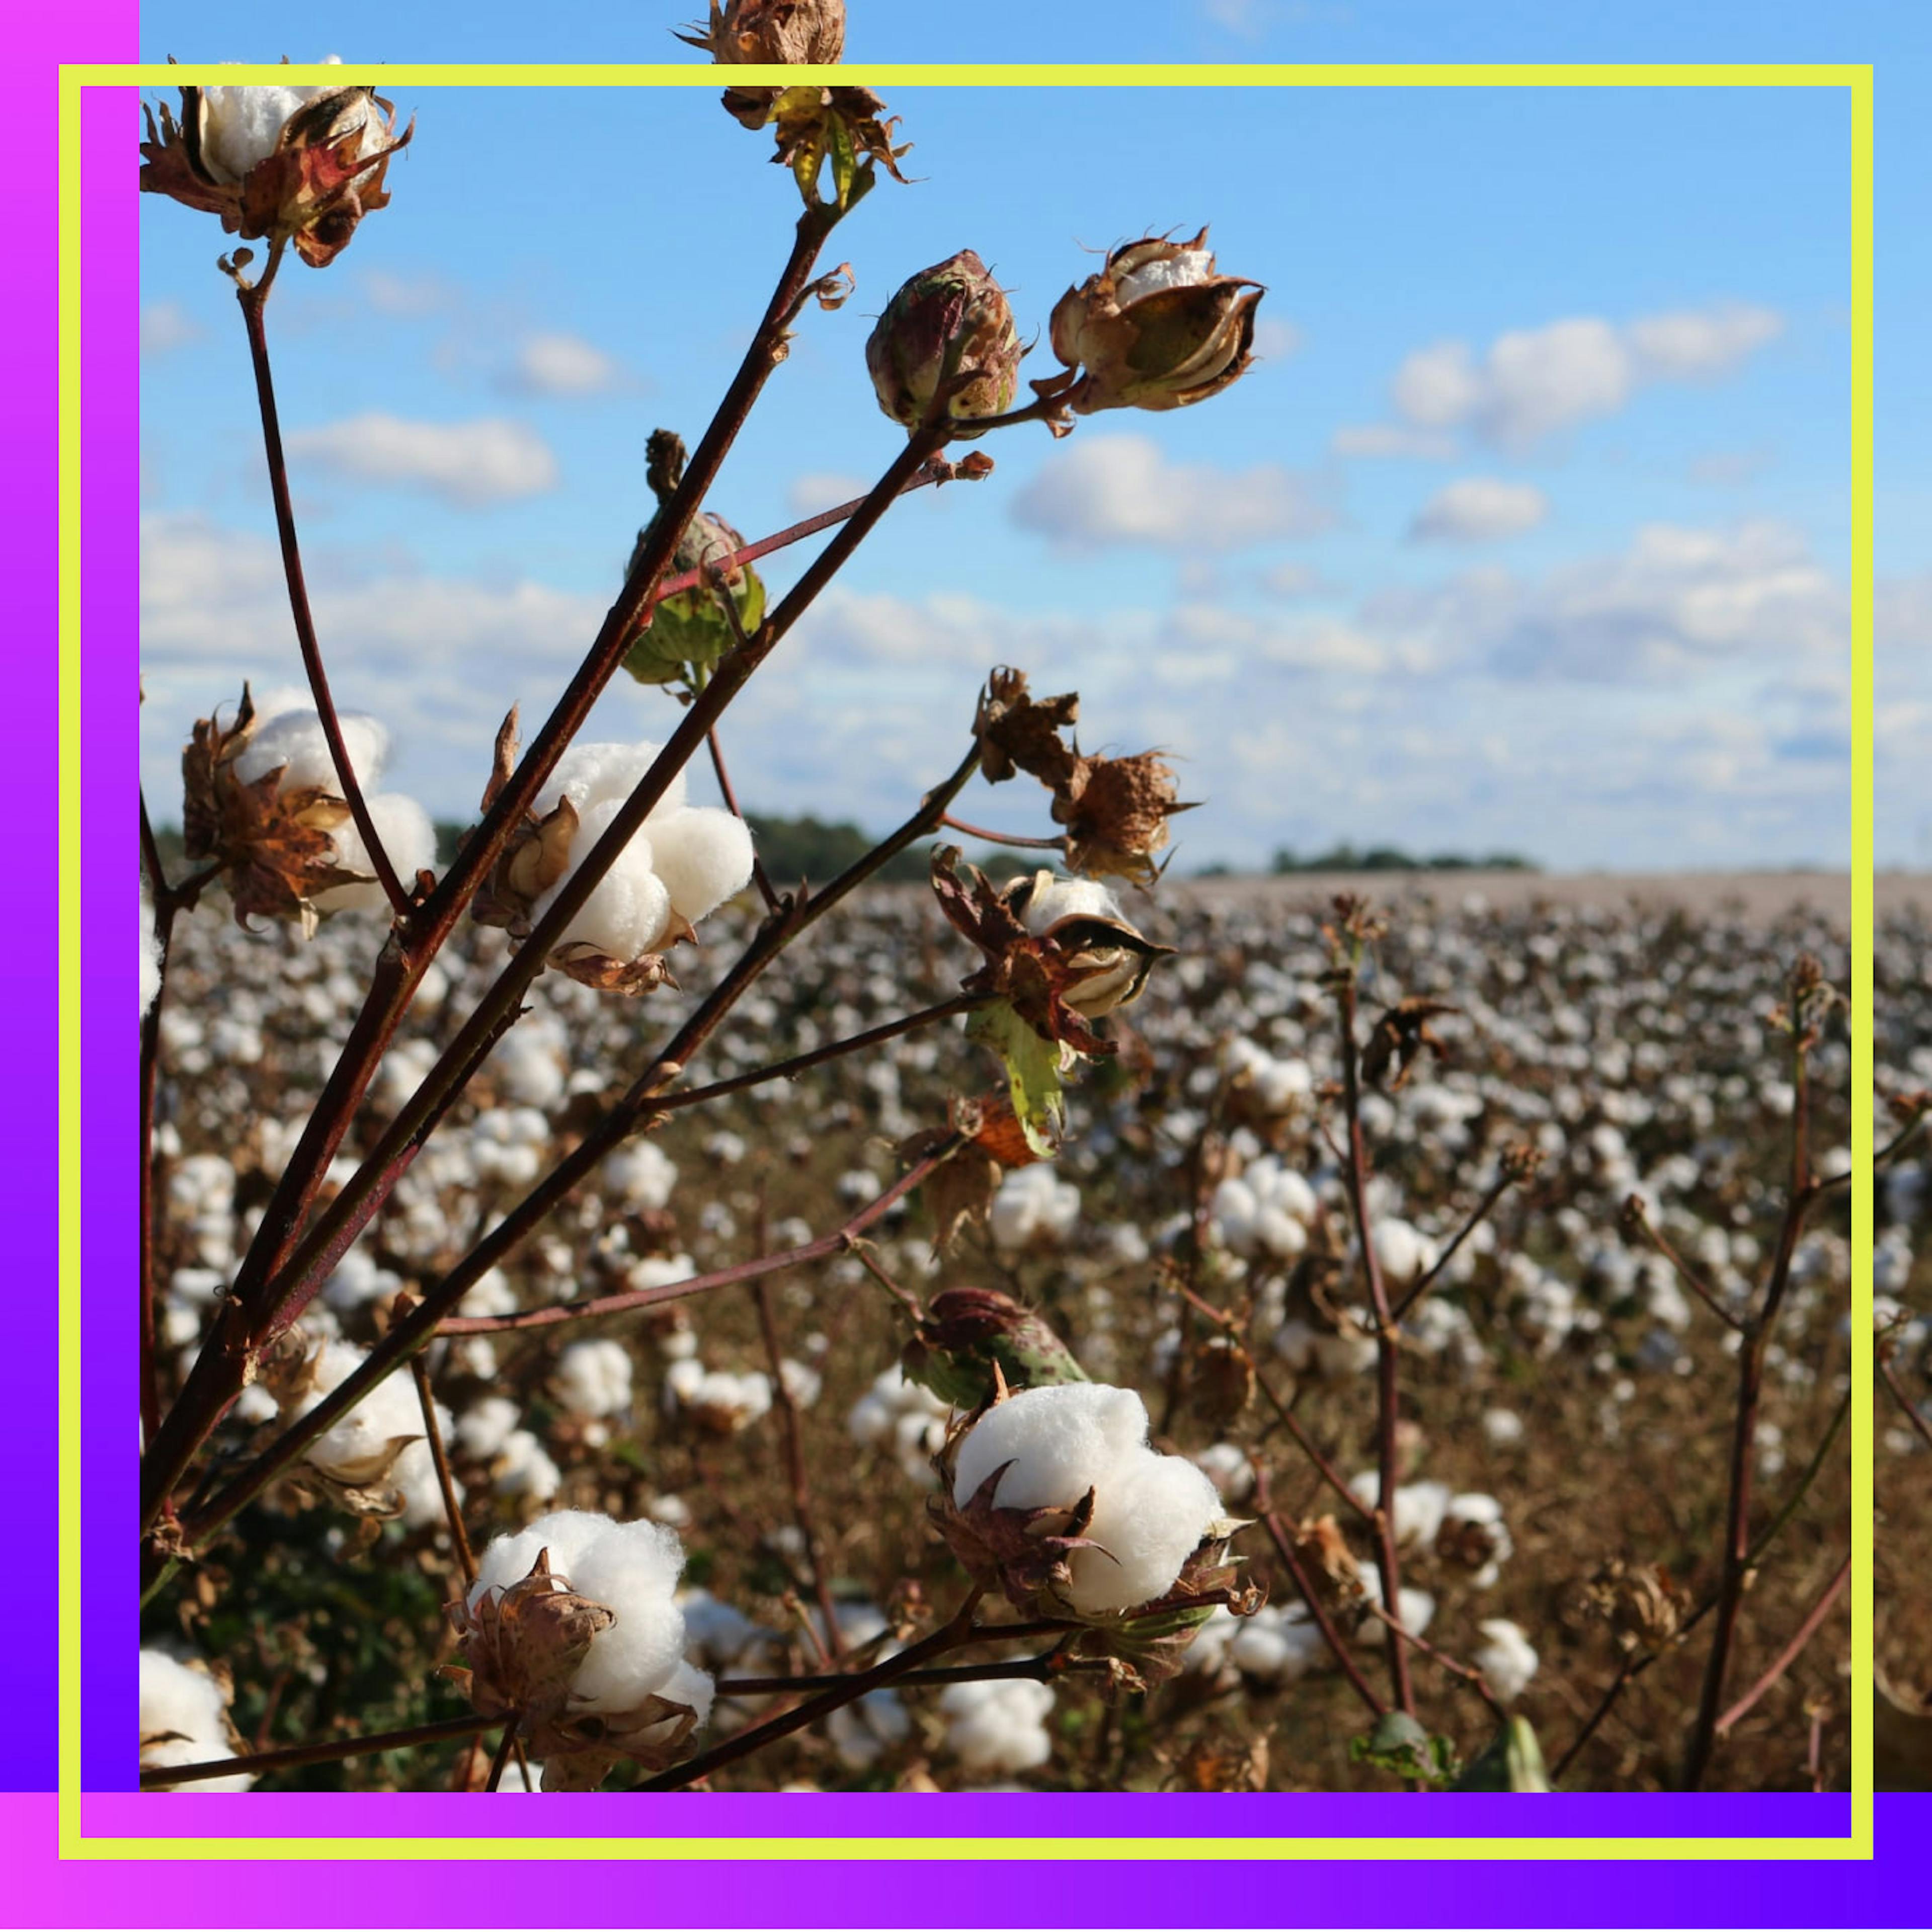 Cotton Is Stained by Slavery’s Legacy—So I Threw Out My Cotton Clothes 